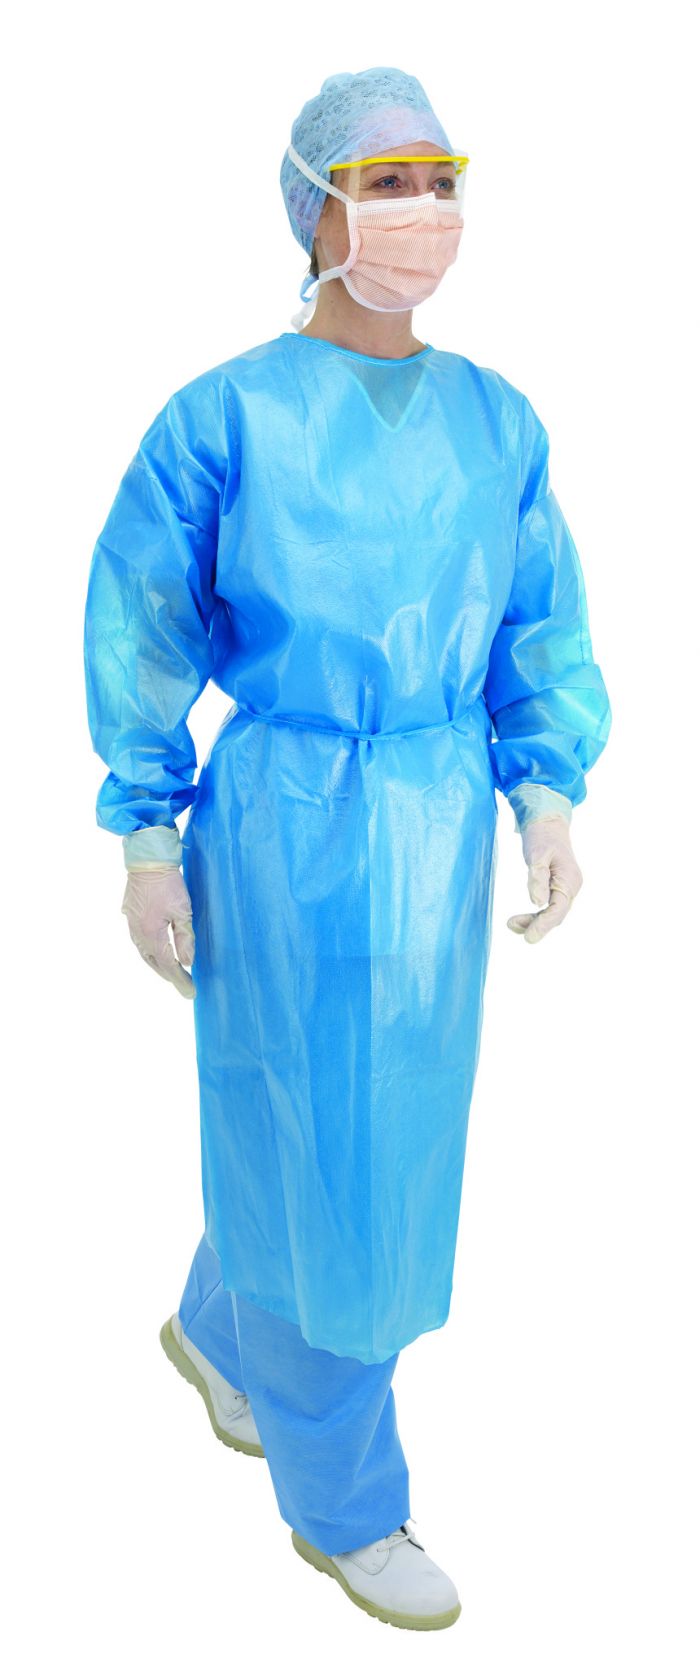 Fluid Protect Gown - Long Sleeved - Elasticated Cuff - Blue - (Single)